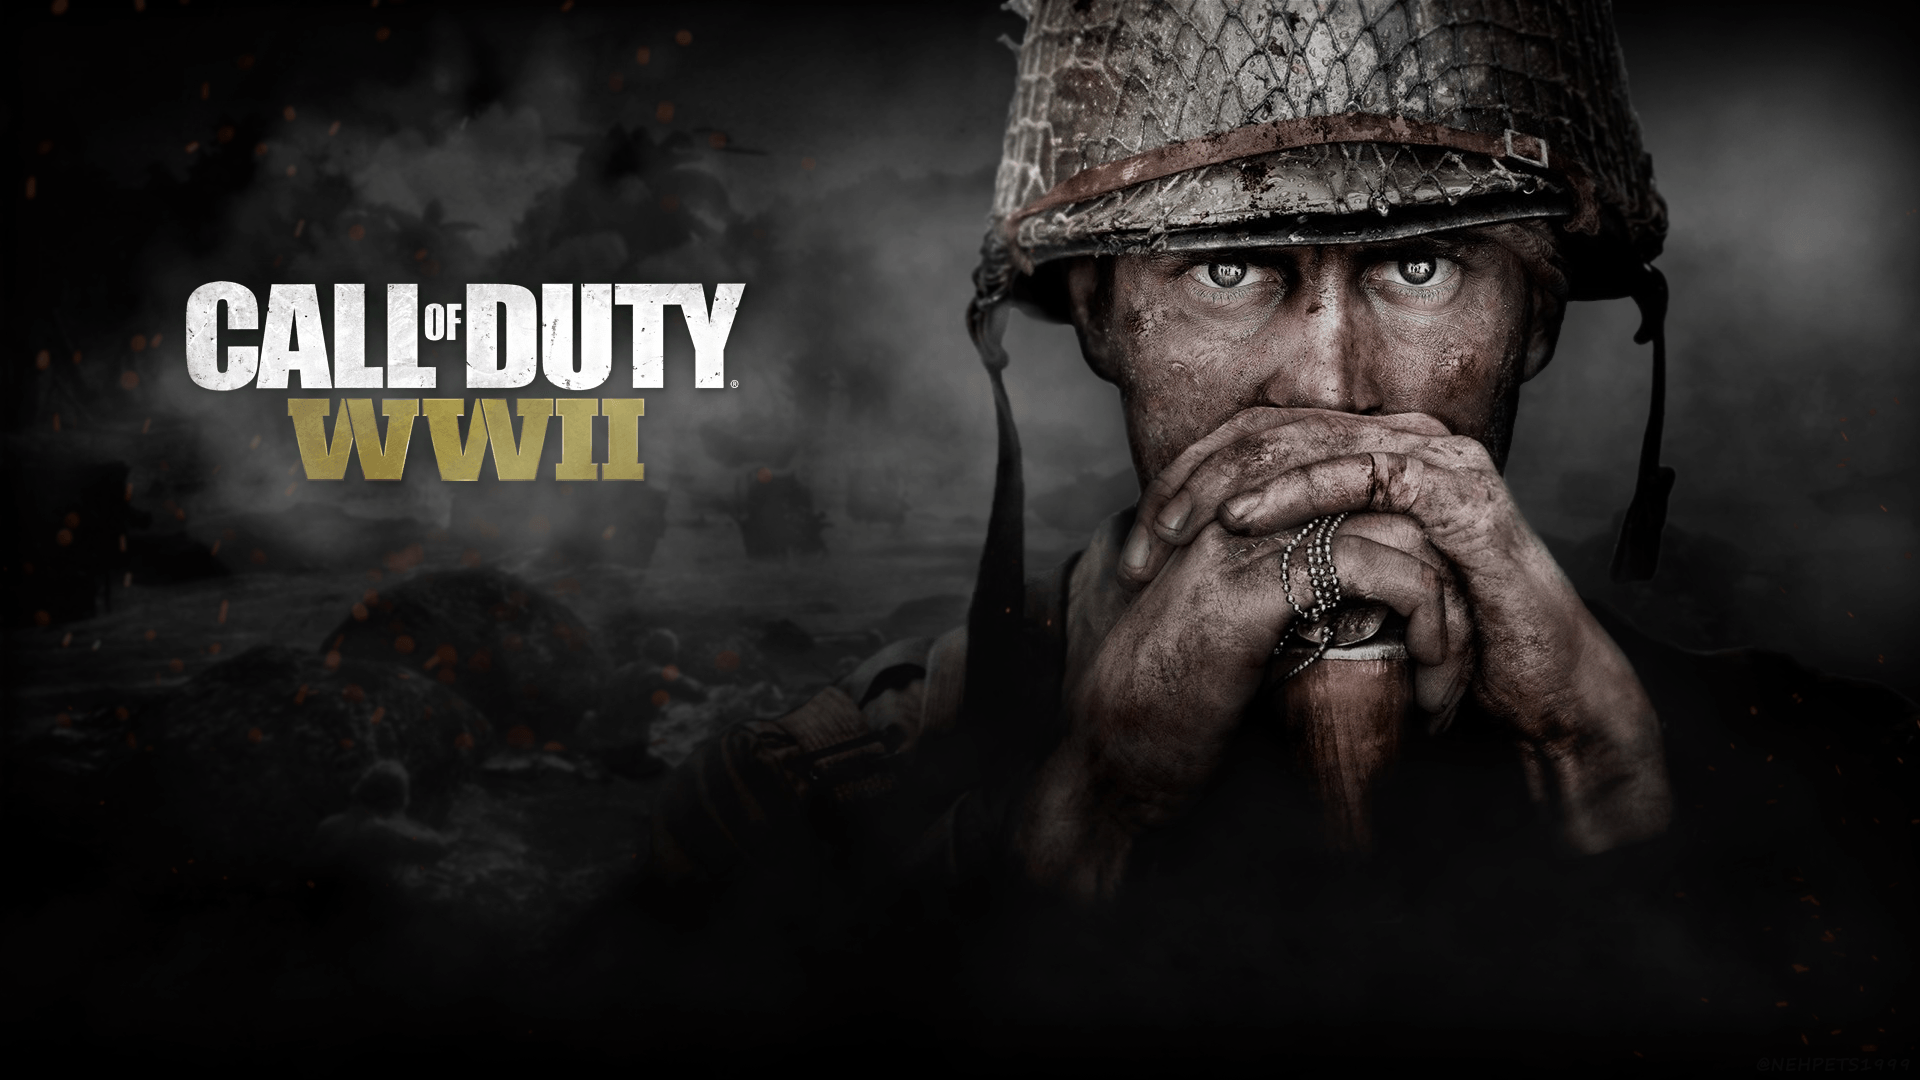 Call of Duty WWII Wallpaper 61207 1920x1080 px